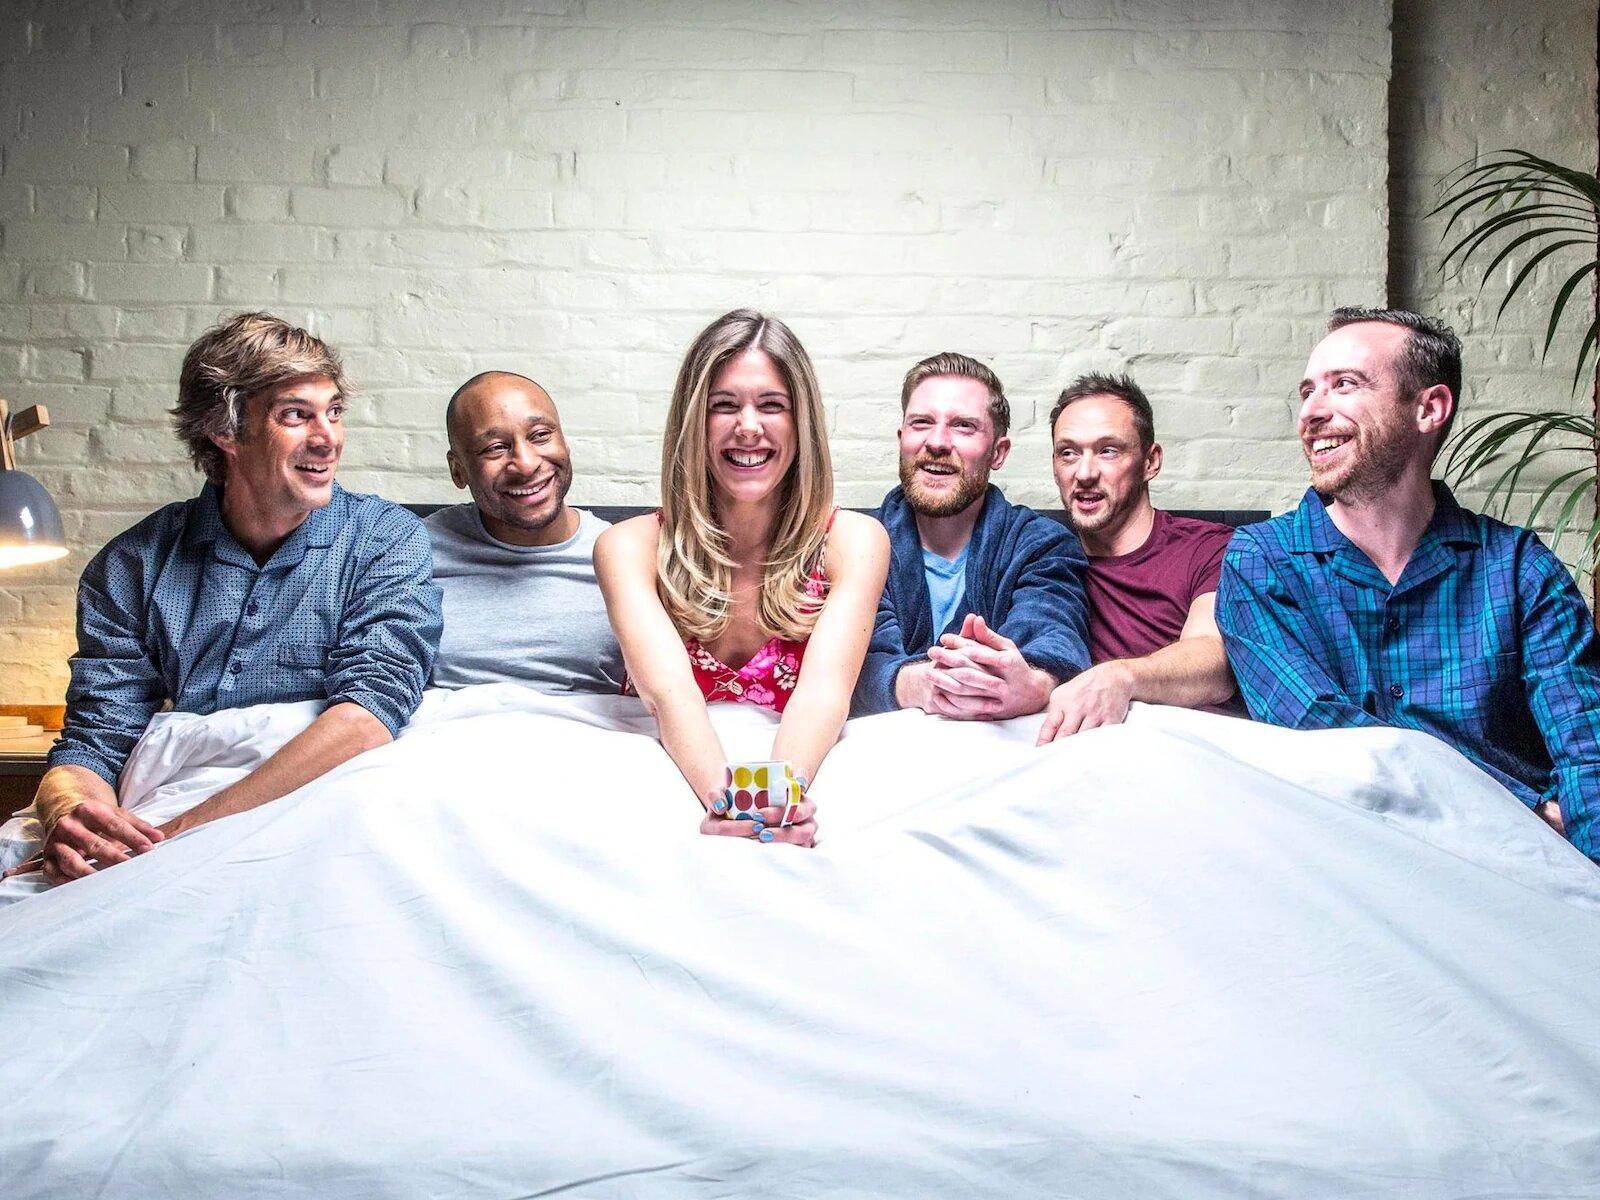 Five men compete for Amy's affections in the first episode of Channel 4's Five Guys a Week